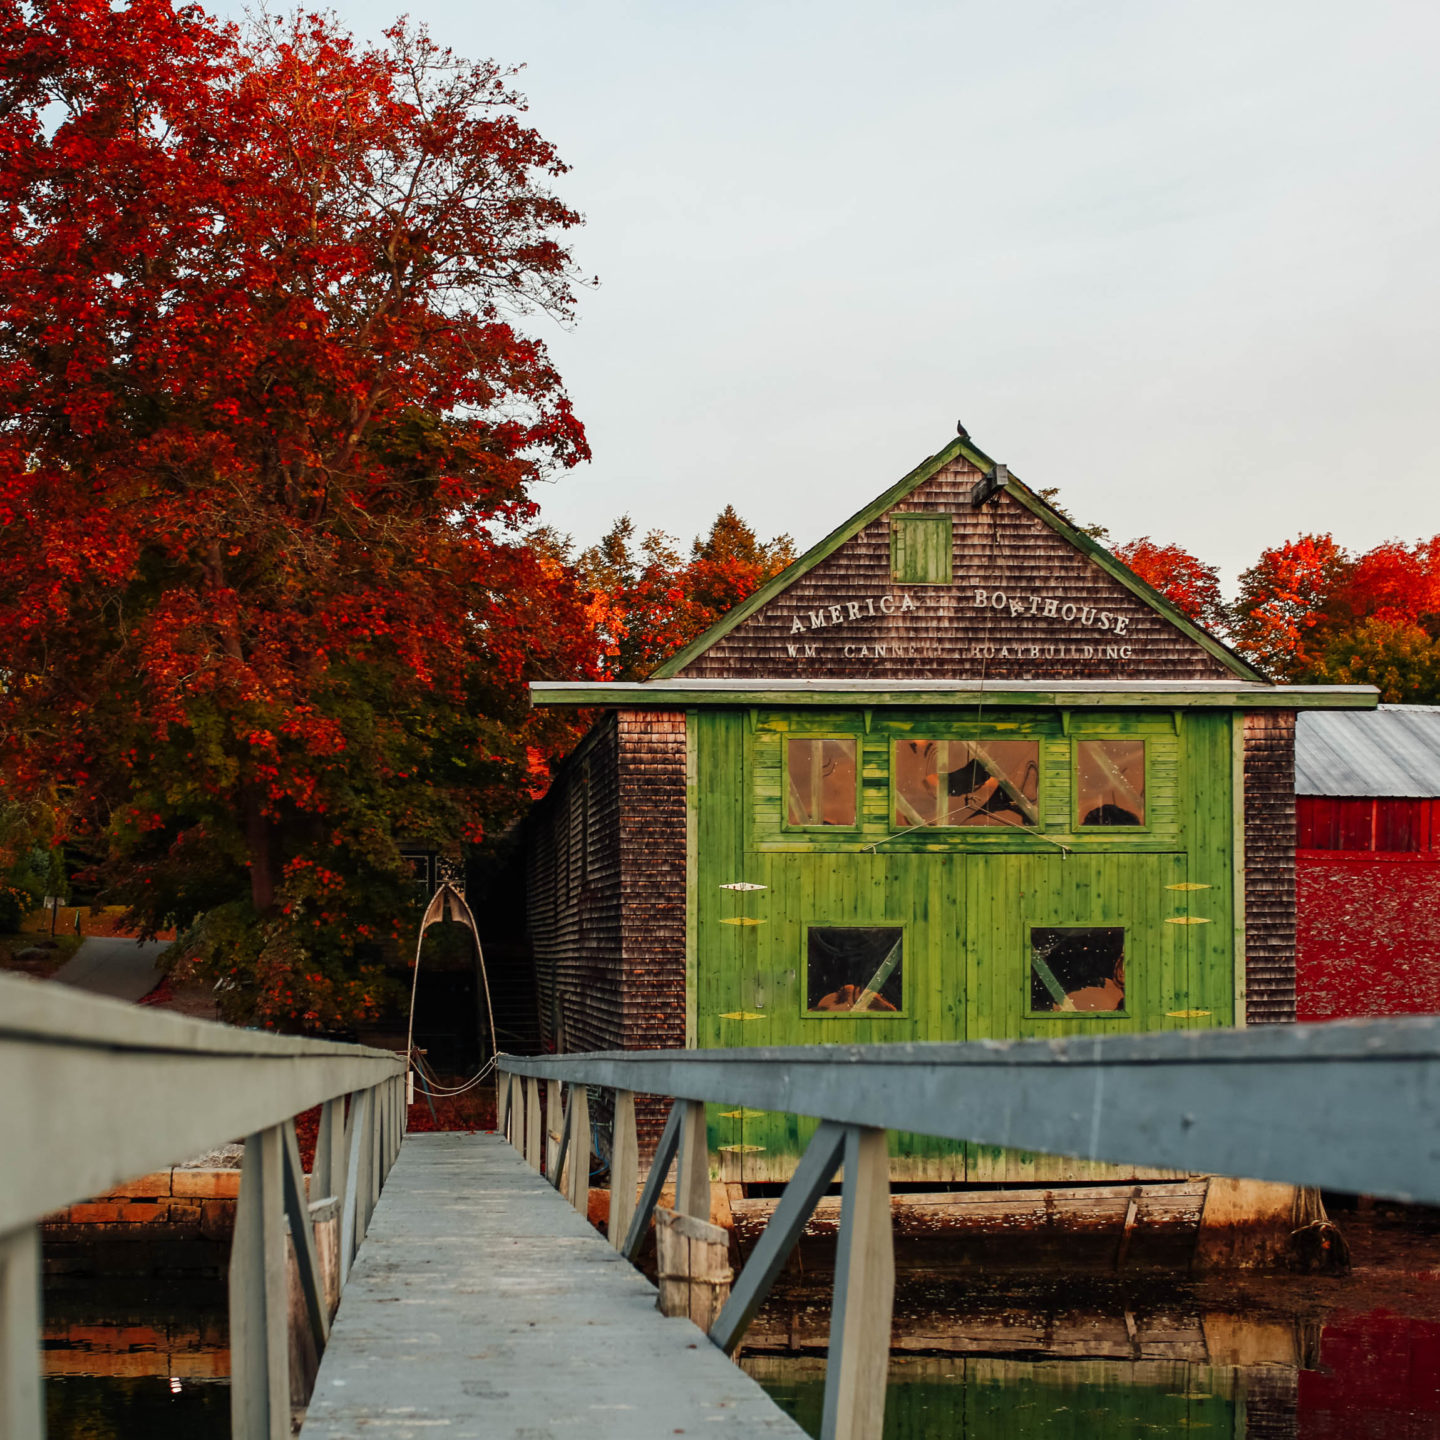 Jess Ann Kirby takes a trip to Camden, Maine to see fall foliage.